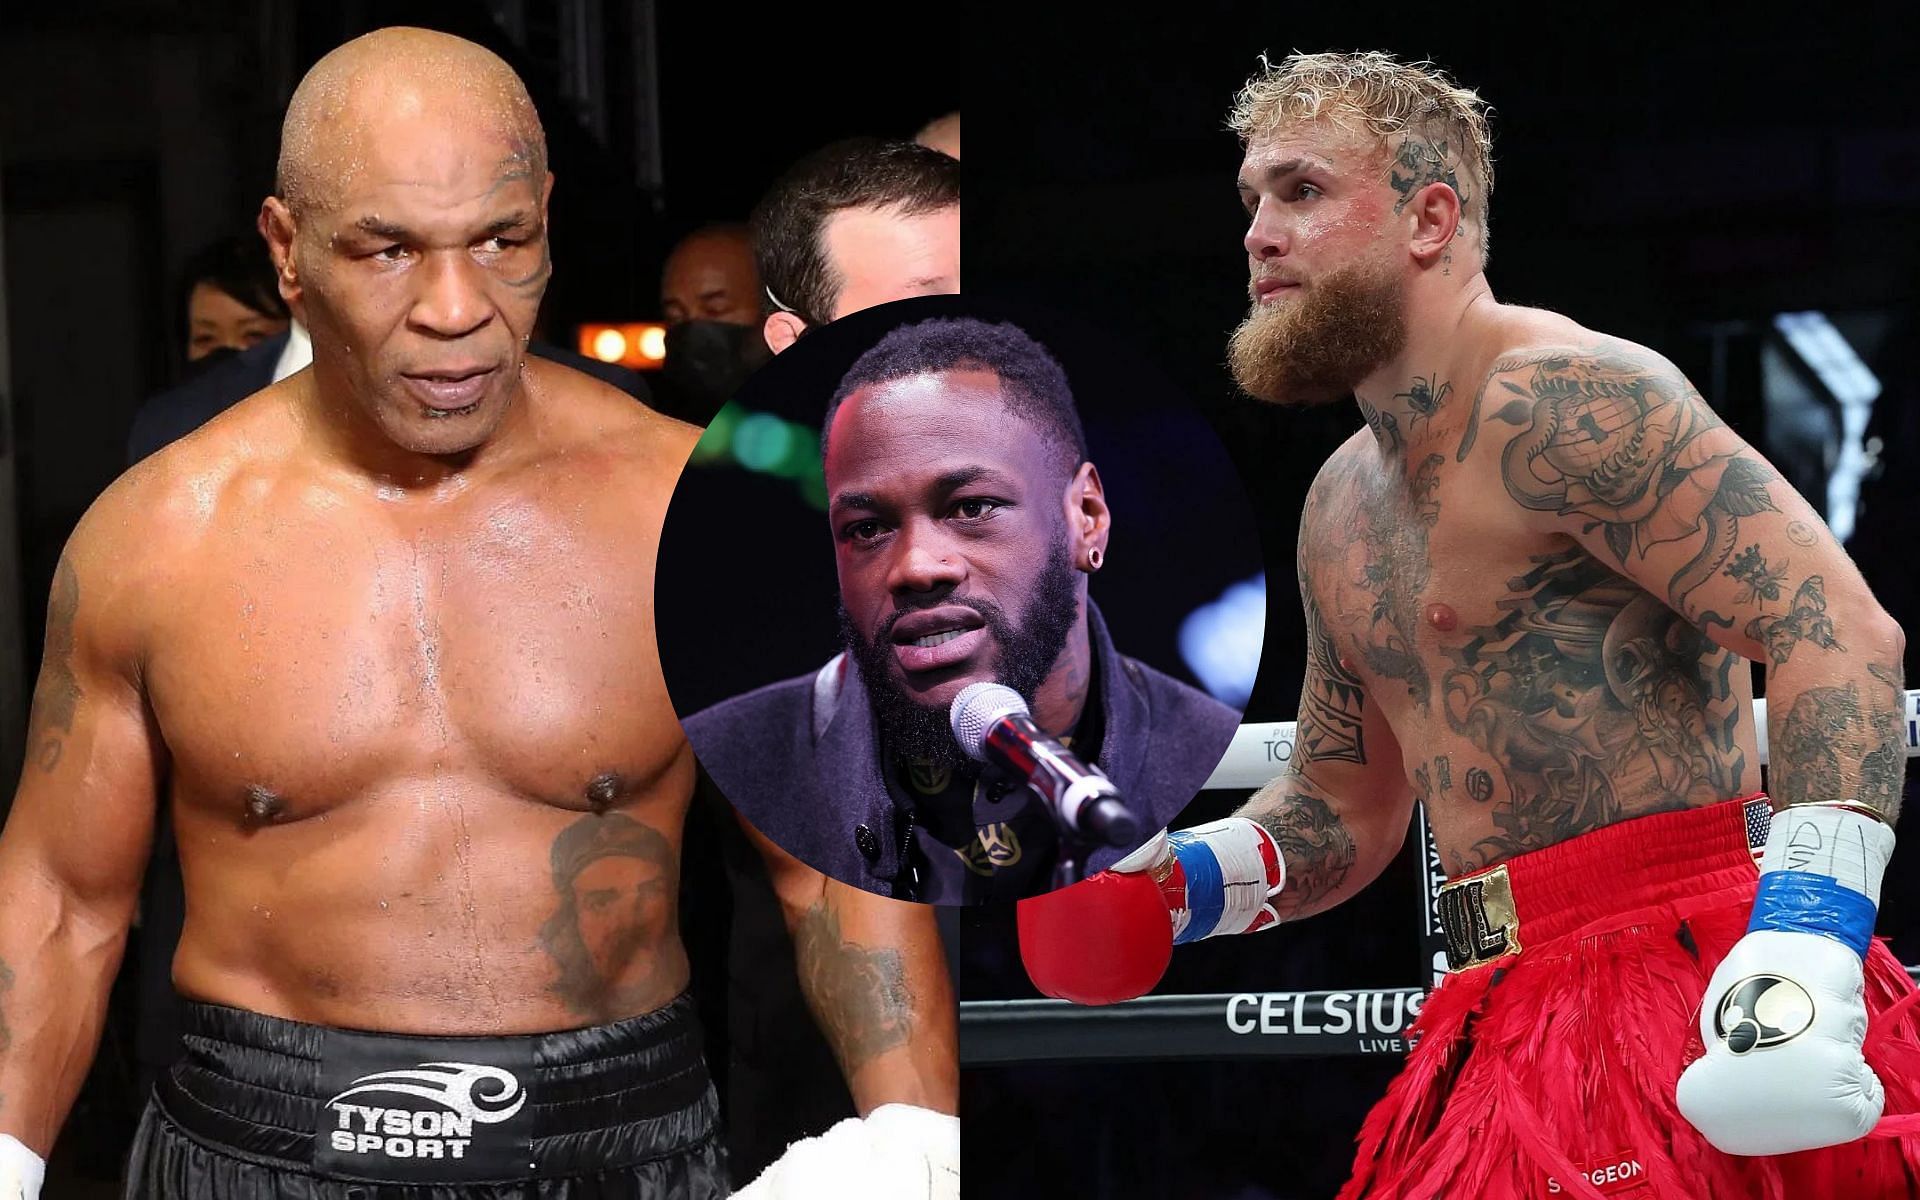 Deontay Wilder slams commission for sanctioning Jake Paul vs. Mike Tyson as a professional fight [Image courtesy: Getty Images]